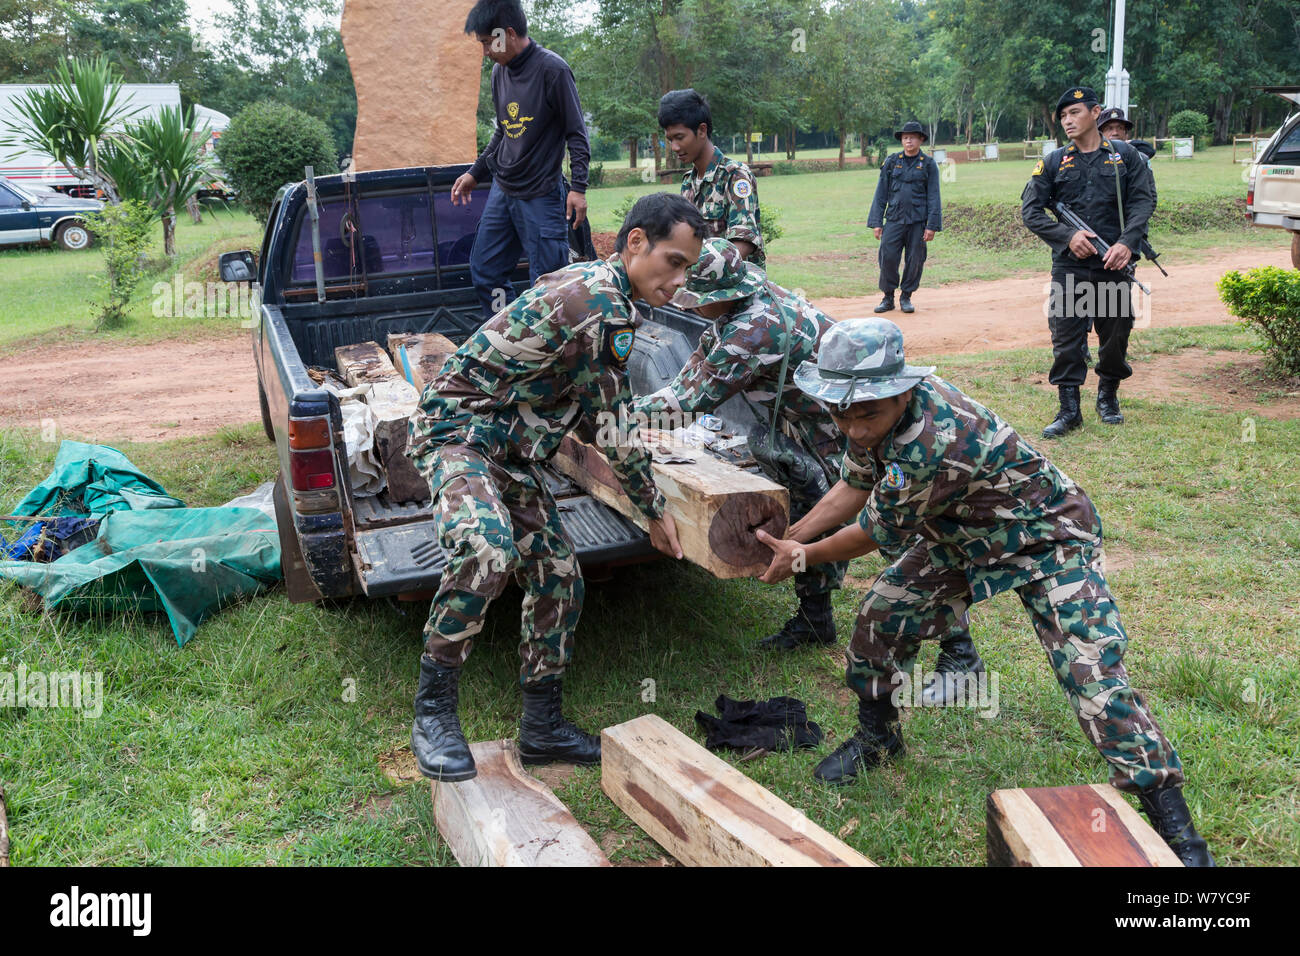 Thap Lan rangers unloading Siam rosewood tree (Dalbergia cochinchinensis) timber confiscated from poachers, Thap Lan National Park, Dong Phayayen-Khao Yai Forest Complex, eastern Thailand, August, 2014. Stock Photo